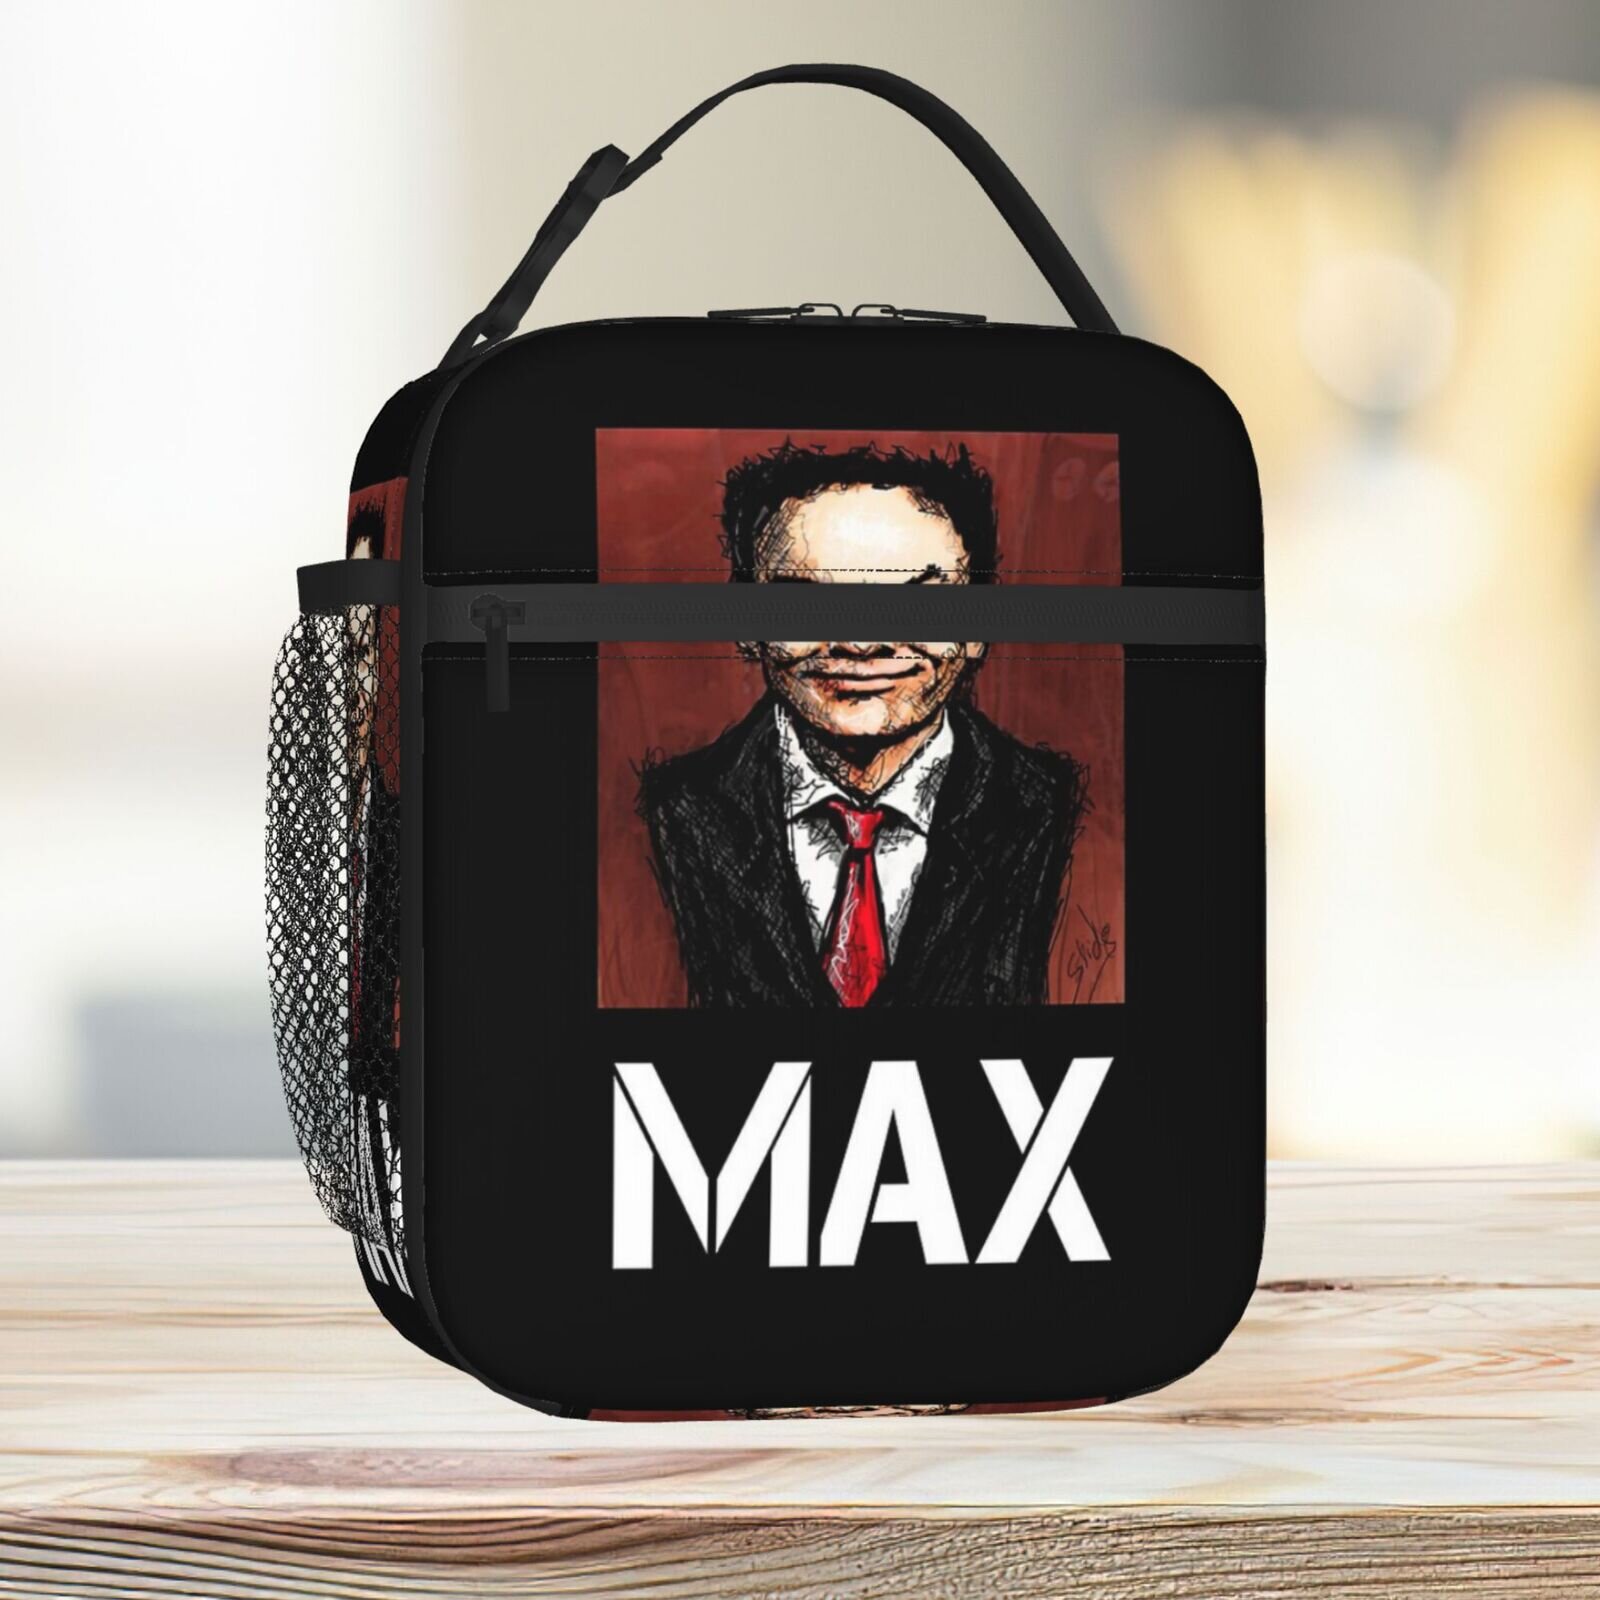 Lunch Bag Max Keiser, 2014 Tote Insulated Cooler Kids School Travel